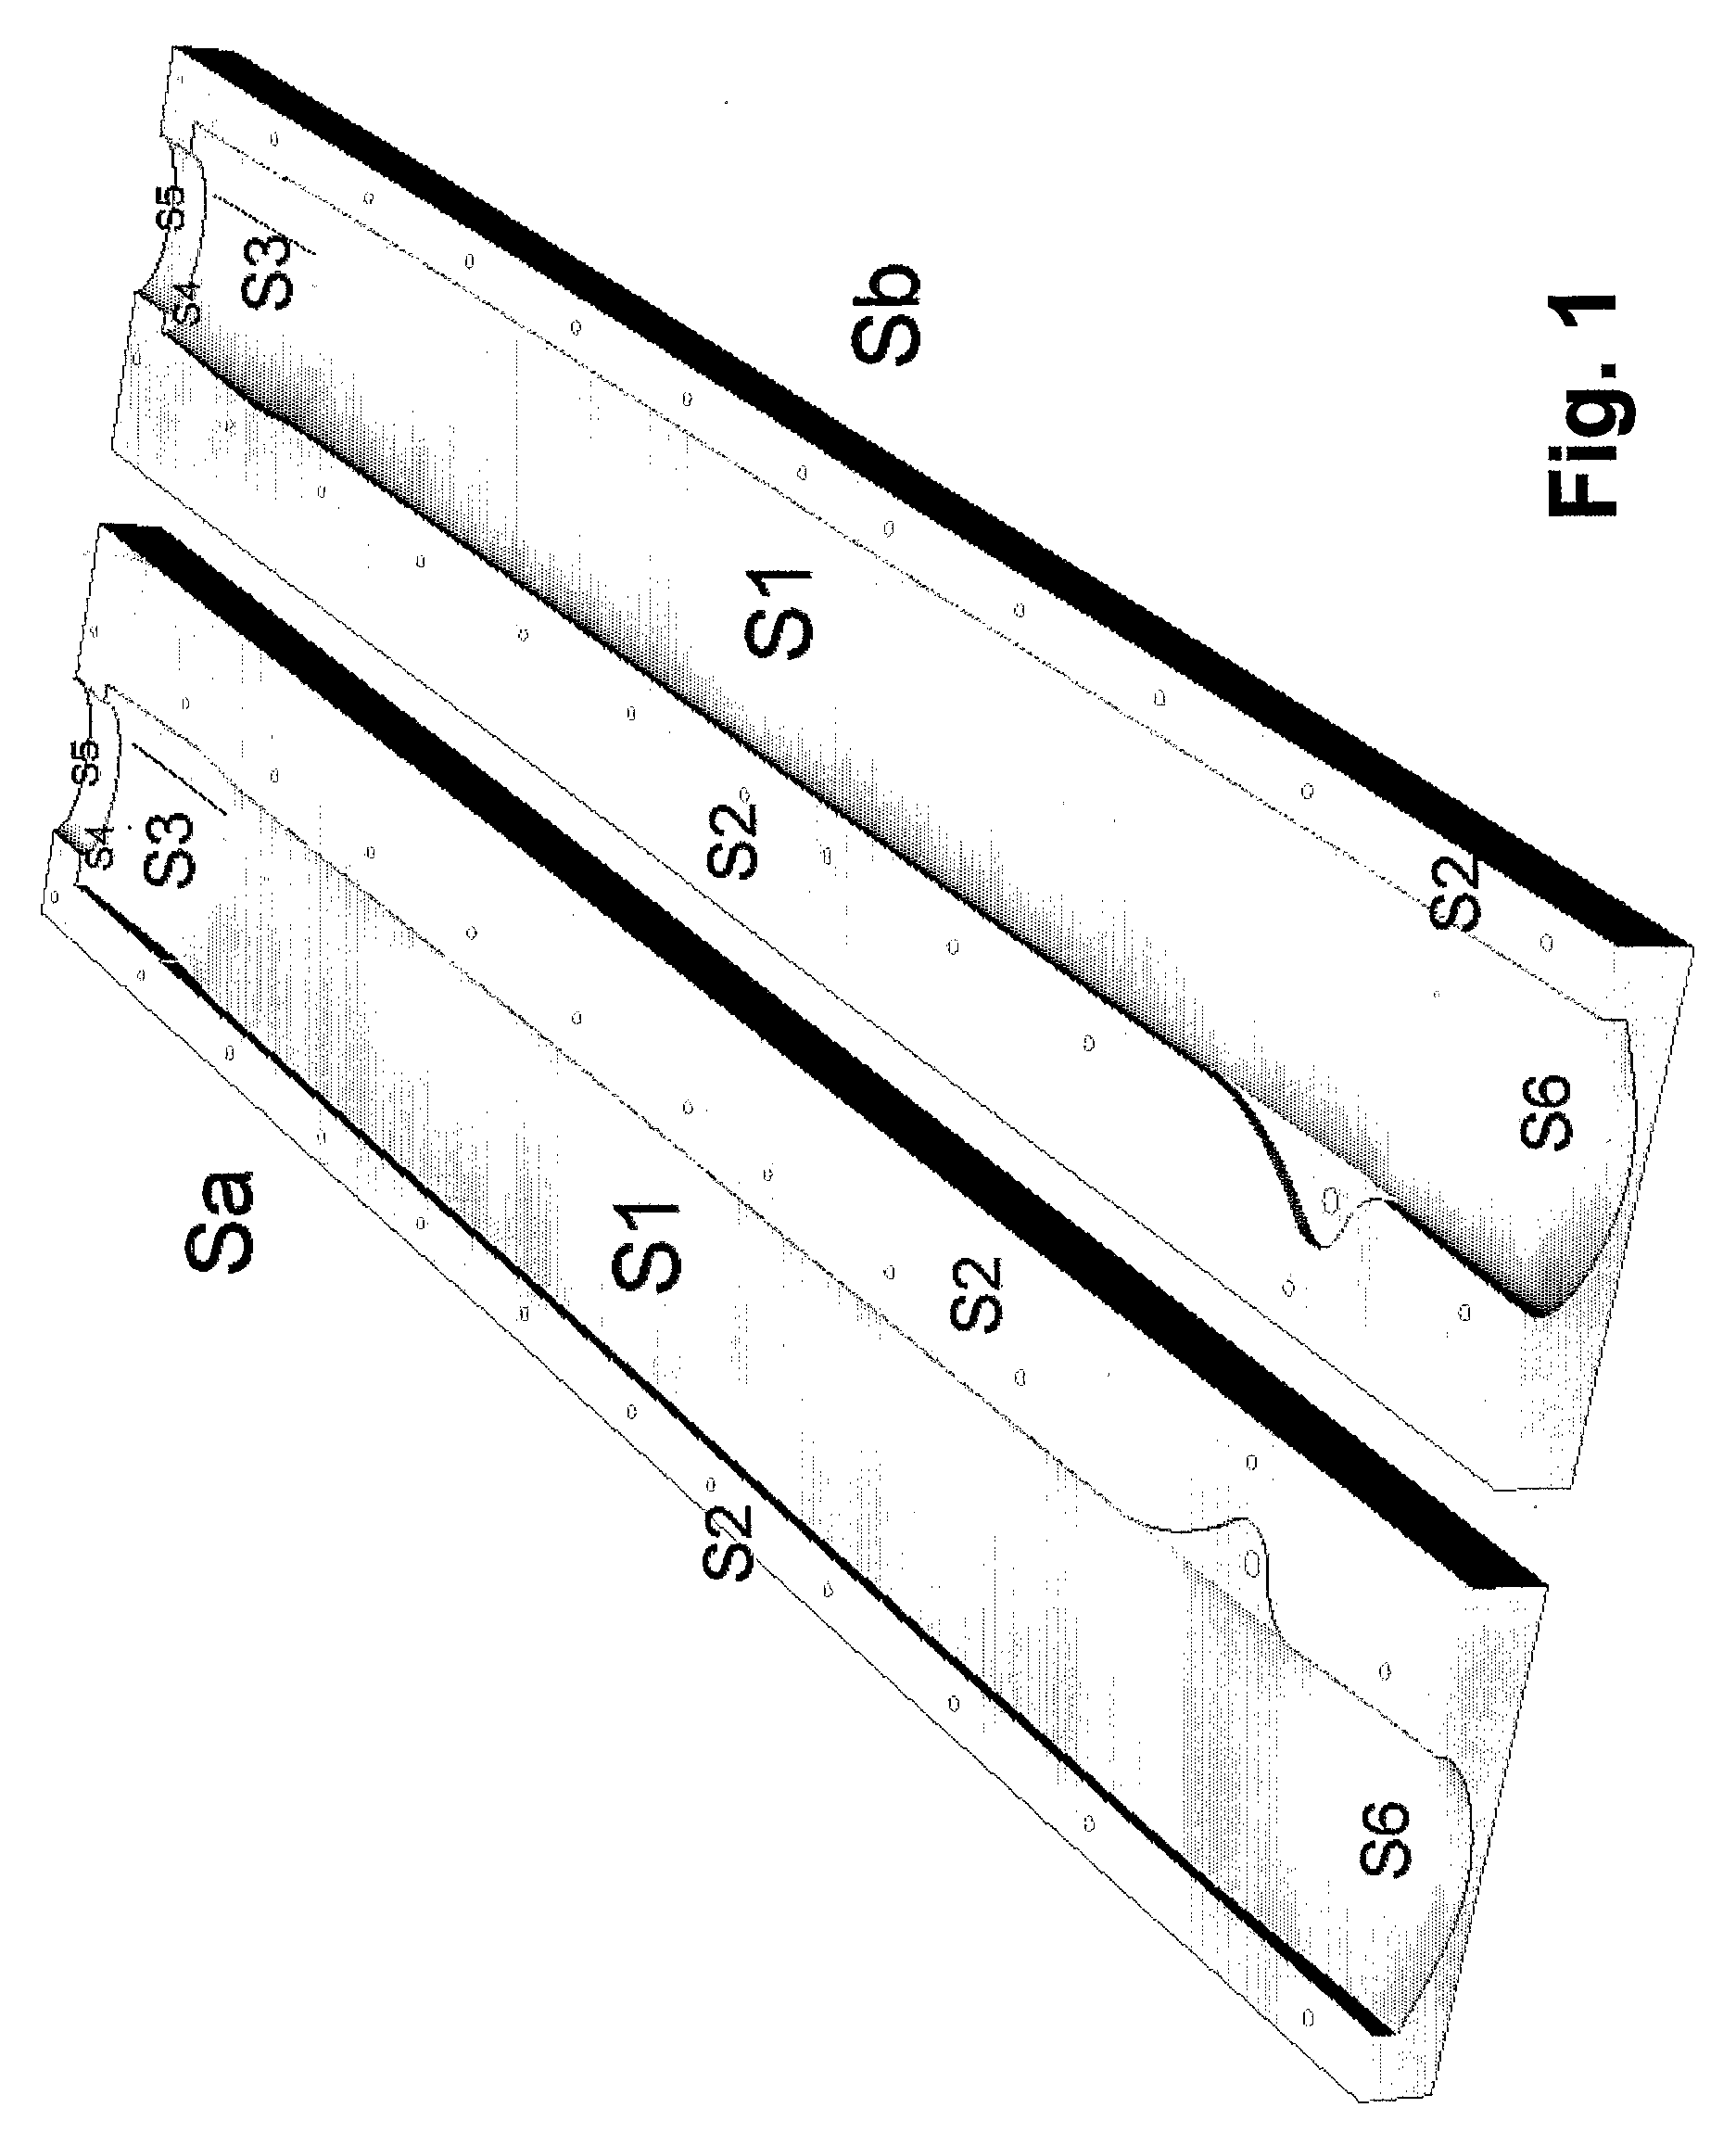 Process for Structurally Joining Modular Hollow Columns or Rods Generically Elongated in Shape and the Product Obtained